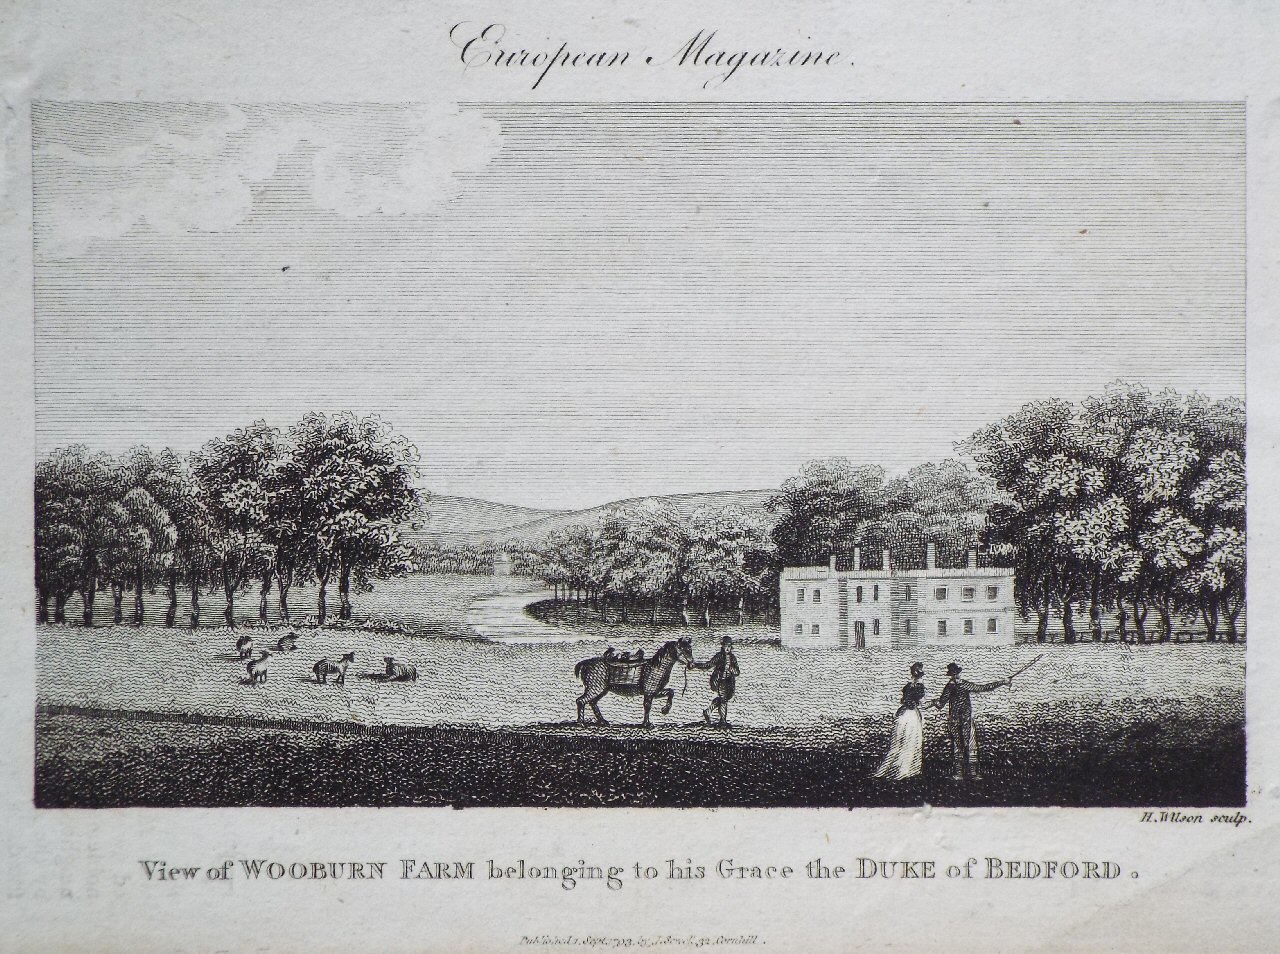 Print - View of Wooburn Farm belonging to his Grace the Duke of Bedford.